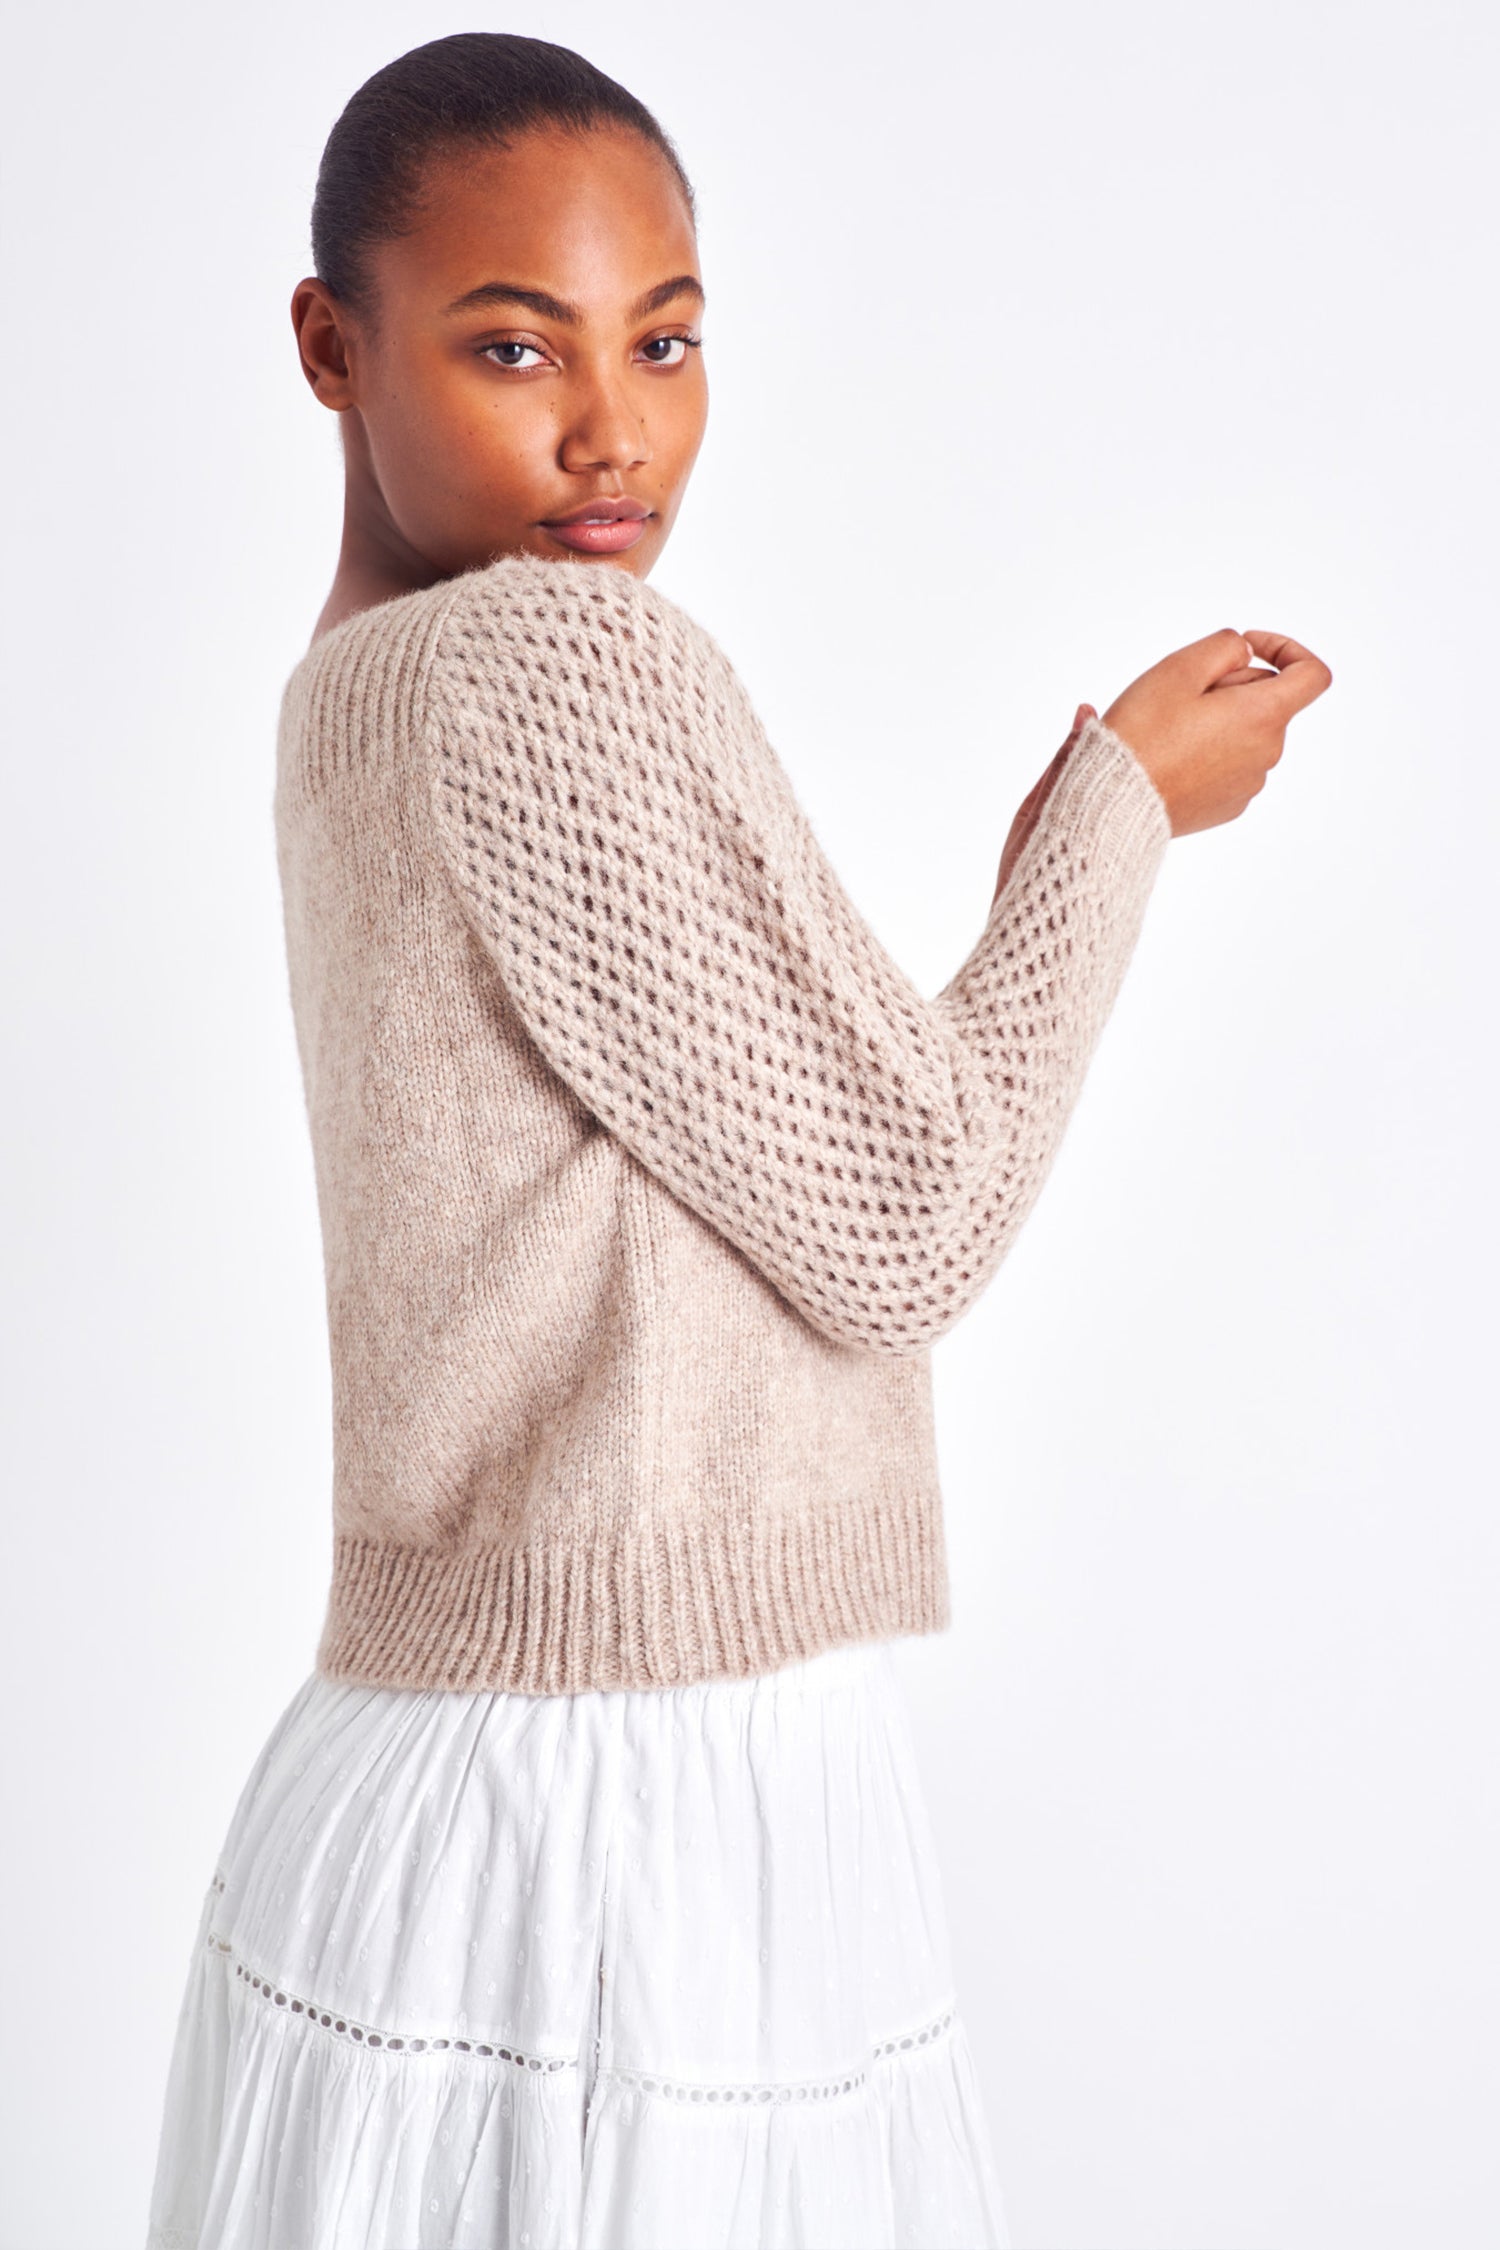 The Rosie oatmeal pullover is made from baby alpaca while being extremely light and full with a chunky look. It has a straight rib neckline and a straight body with rib finishing. It is an open knit weave with a puffy shoulder that slims out at the bottom. 